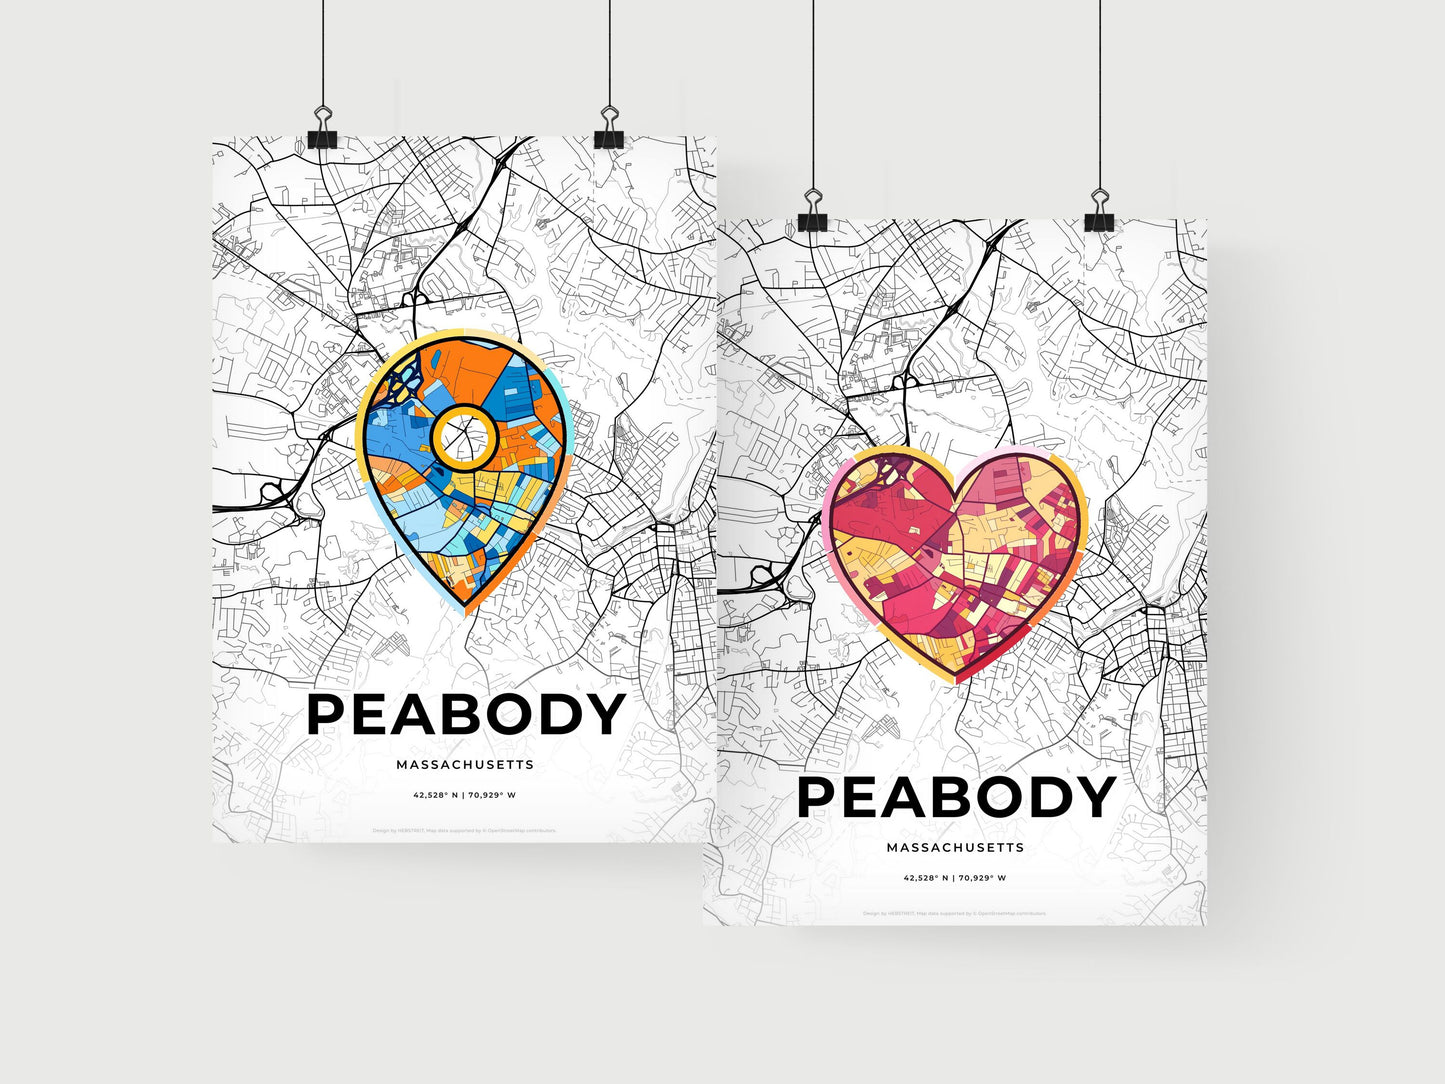 PEABODY MASSACHUSETTS minimal art map with a colorful icon.